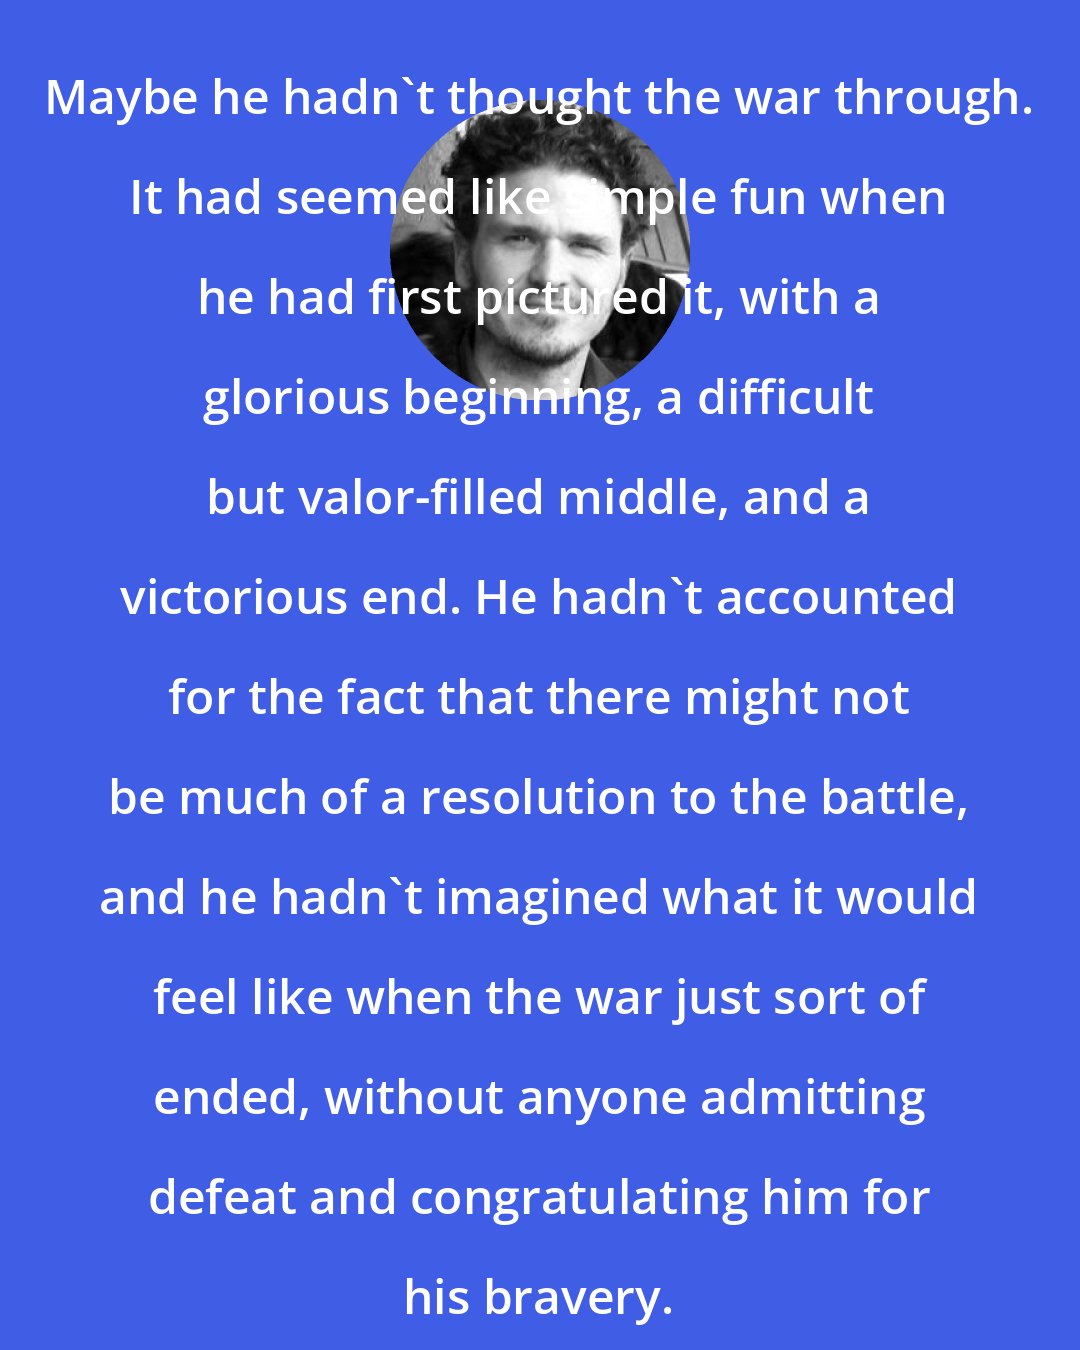 Dave Eggers: Maybe he hadn't thought the war through. It had seemed like simple fun when he had first pictured it, with a glorious beginning, a difficult but valor-filled middle, and a victorious end. He hadn't accounted for the fact that there might not be much of a resolution to the battle, and he hadn't imagined what it would feel like when the war just sort of ended, without anyone admitting defeat and congratulating him for his bravery.